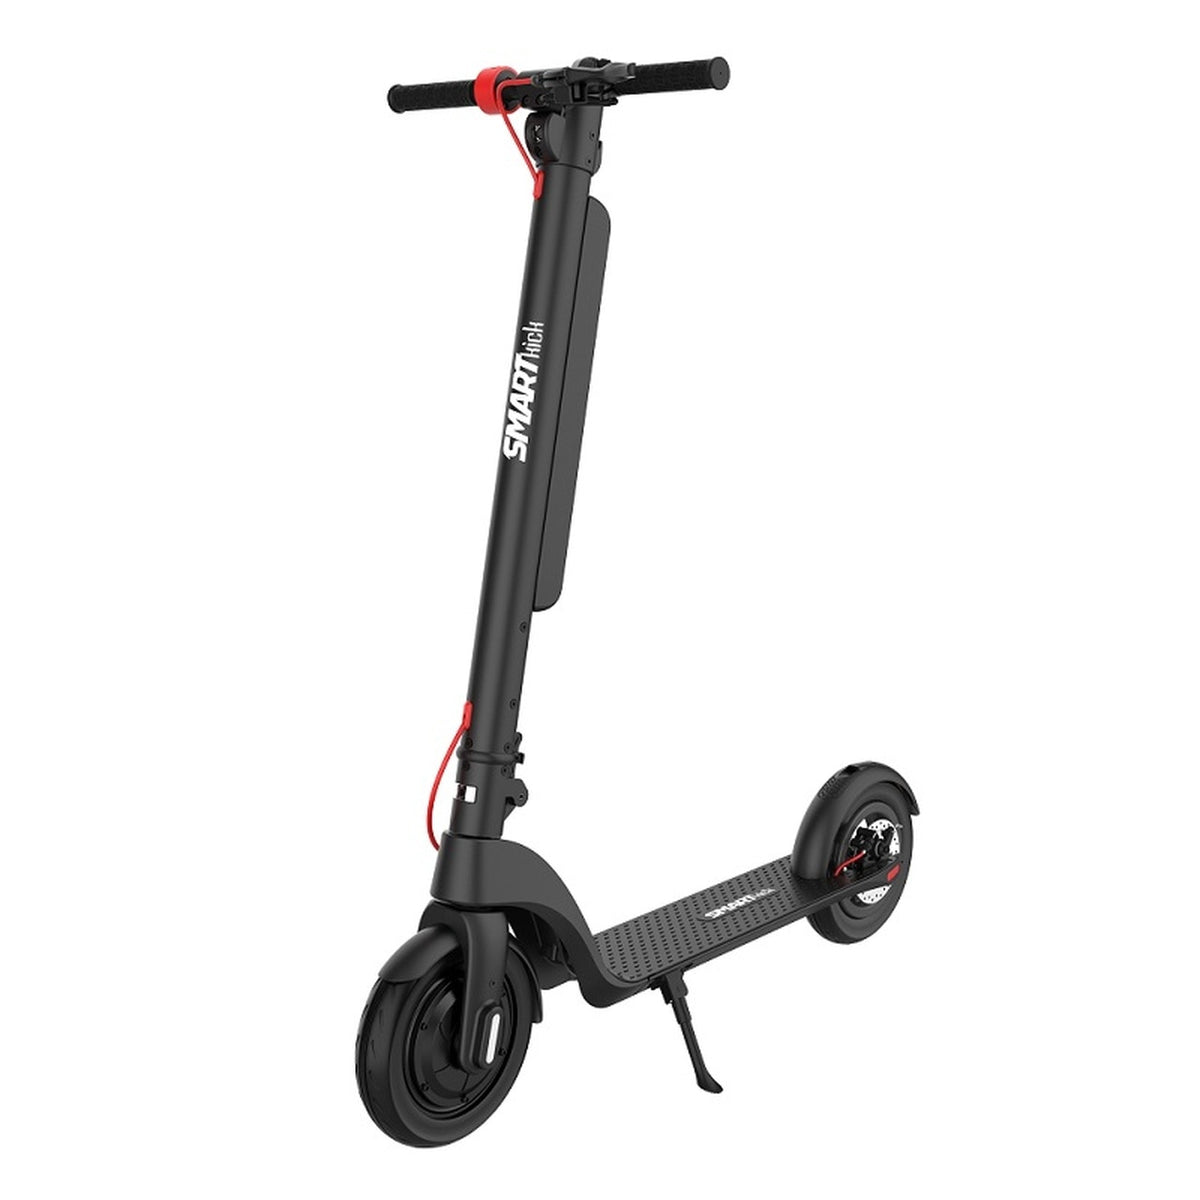 SmartKick X8 Plus Electric Kick Scooter with Quick Removable Battery, Triple Brakes